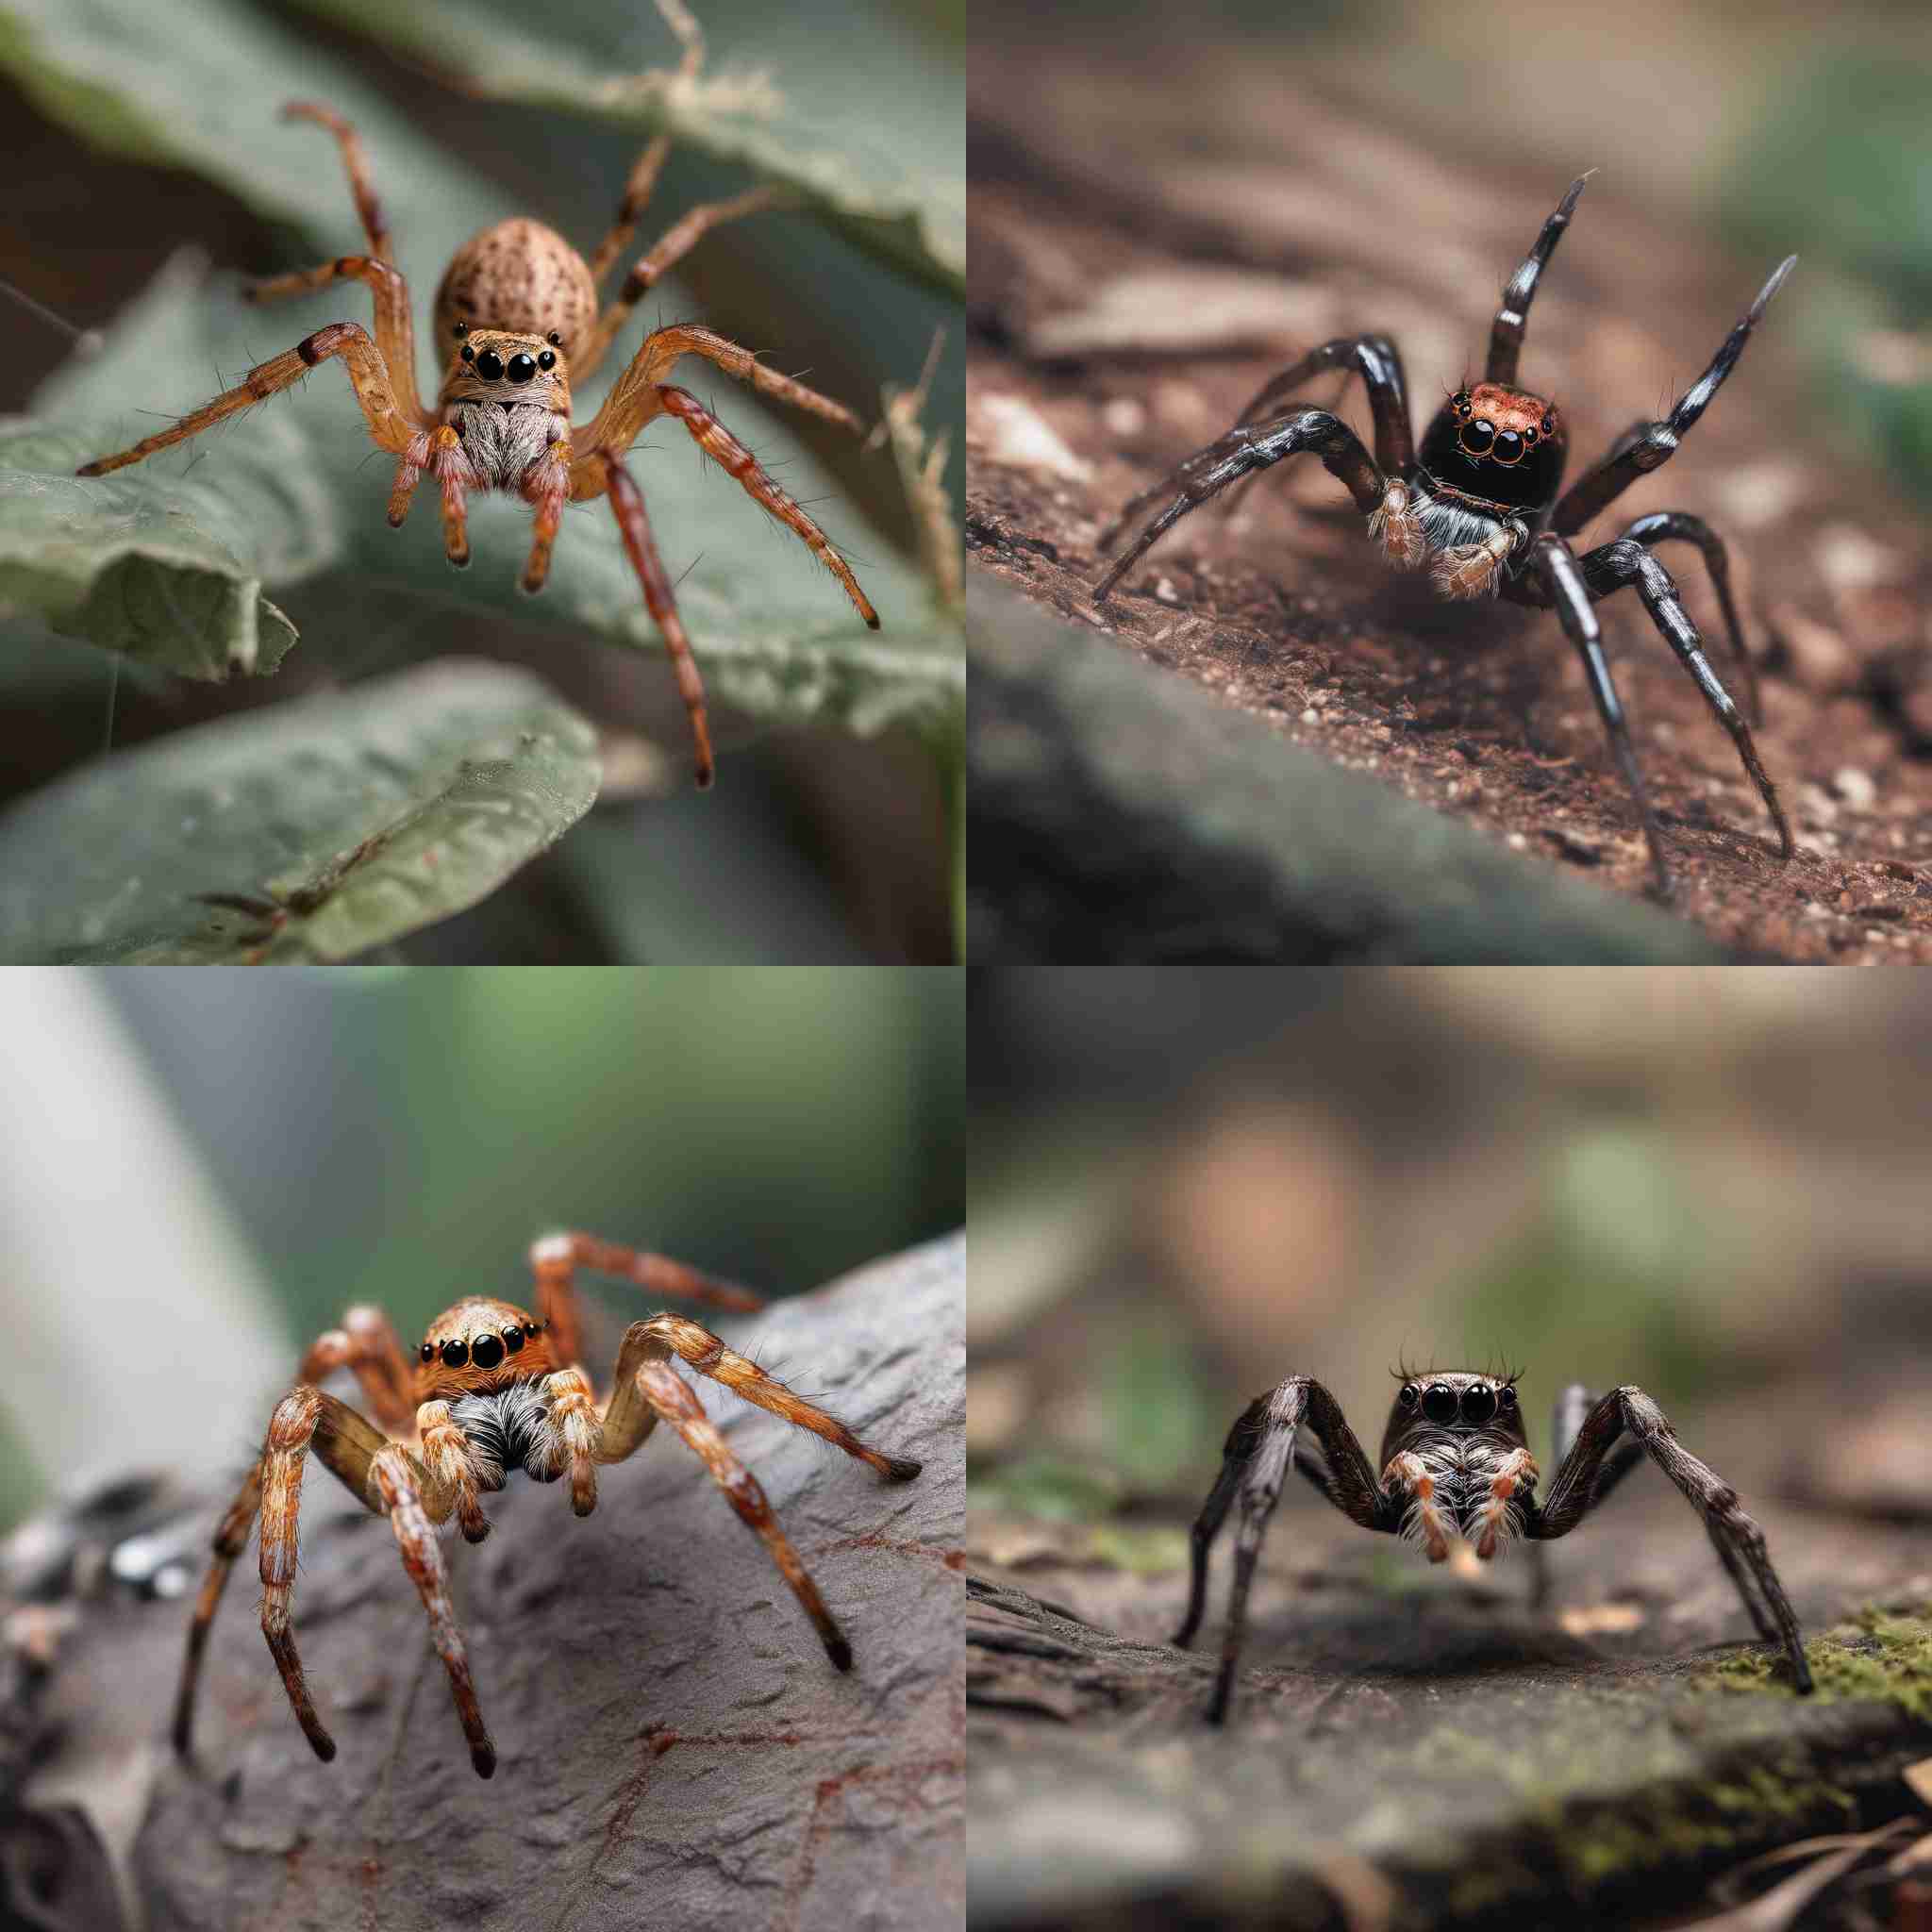 A spider exploring its surroundings